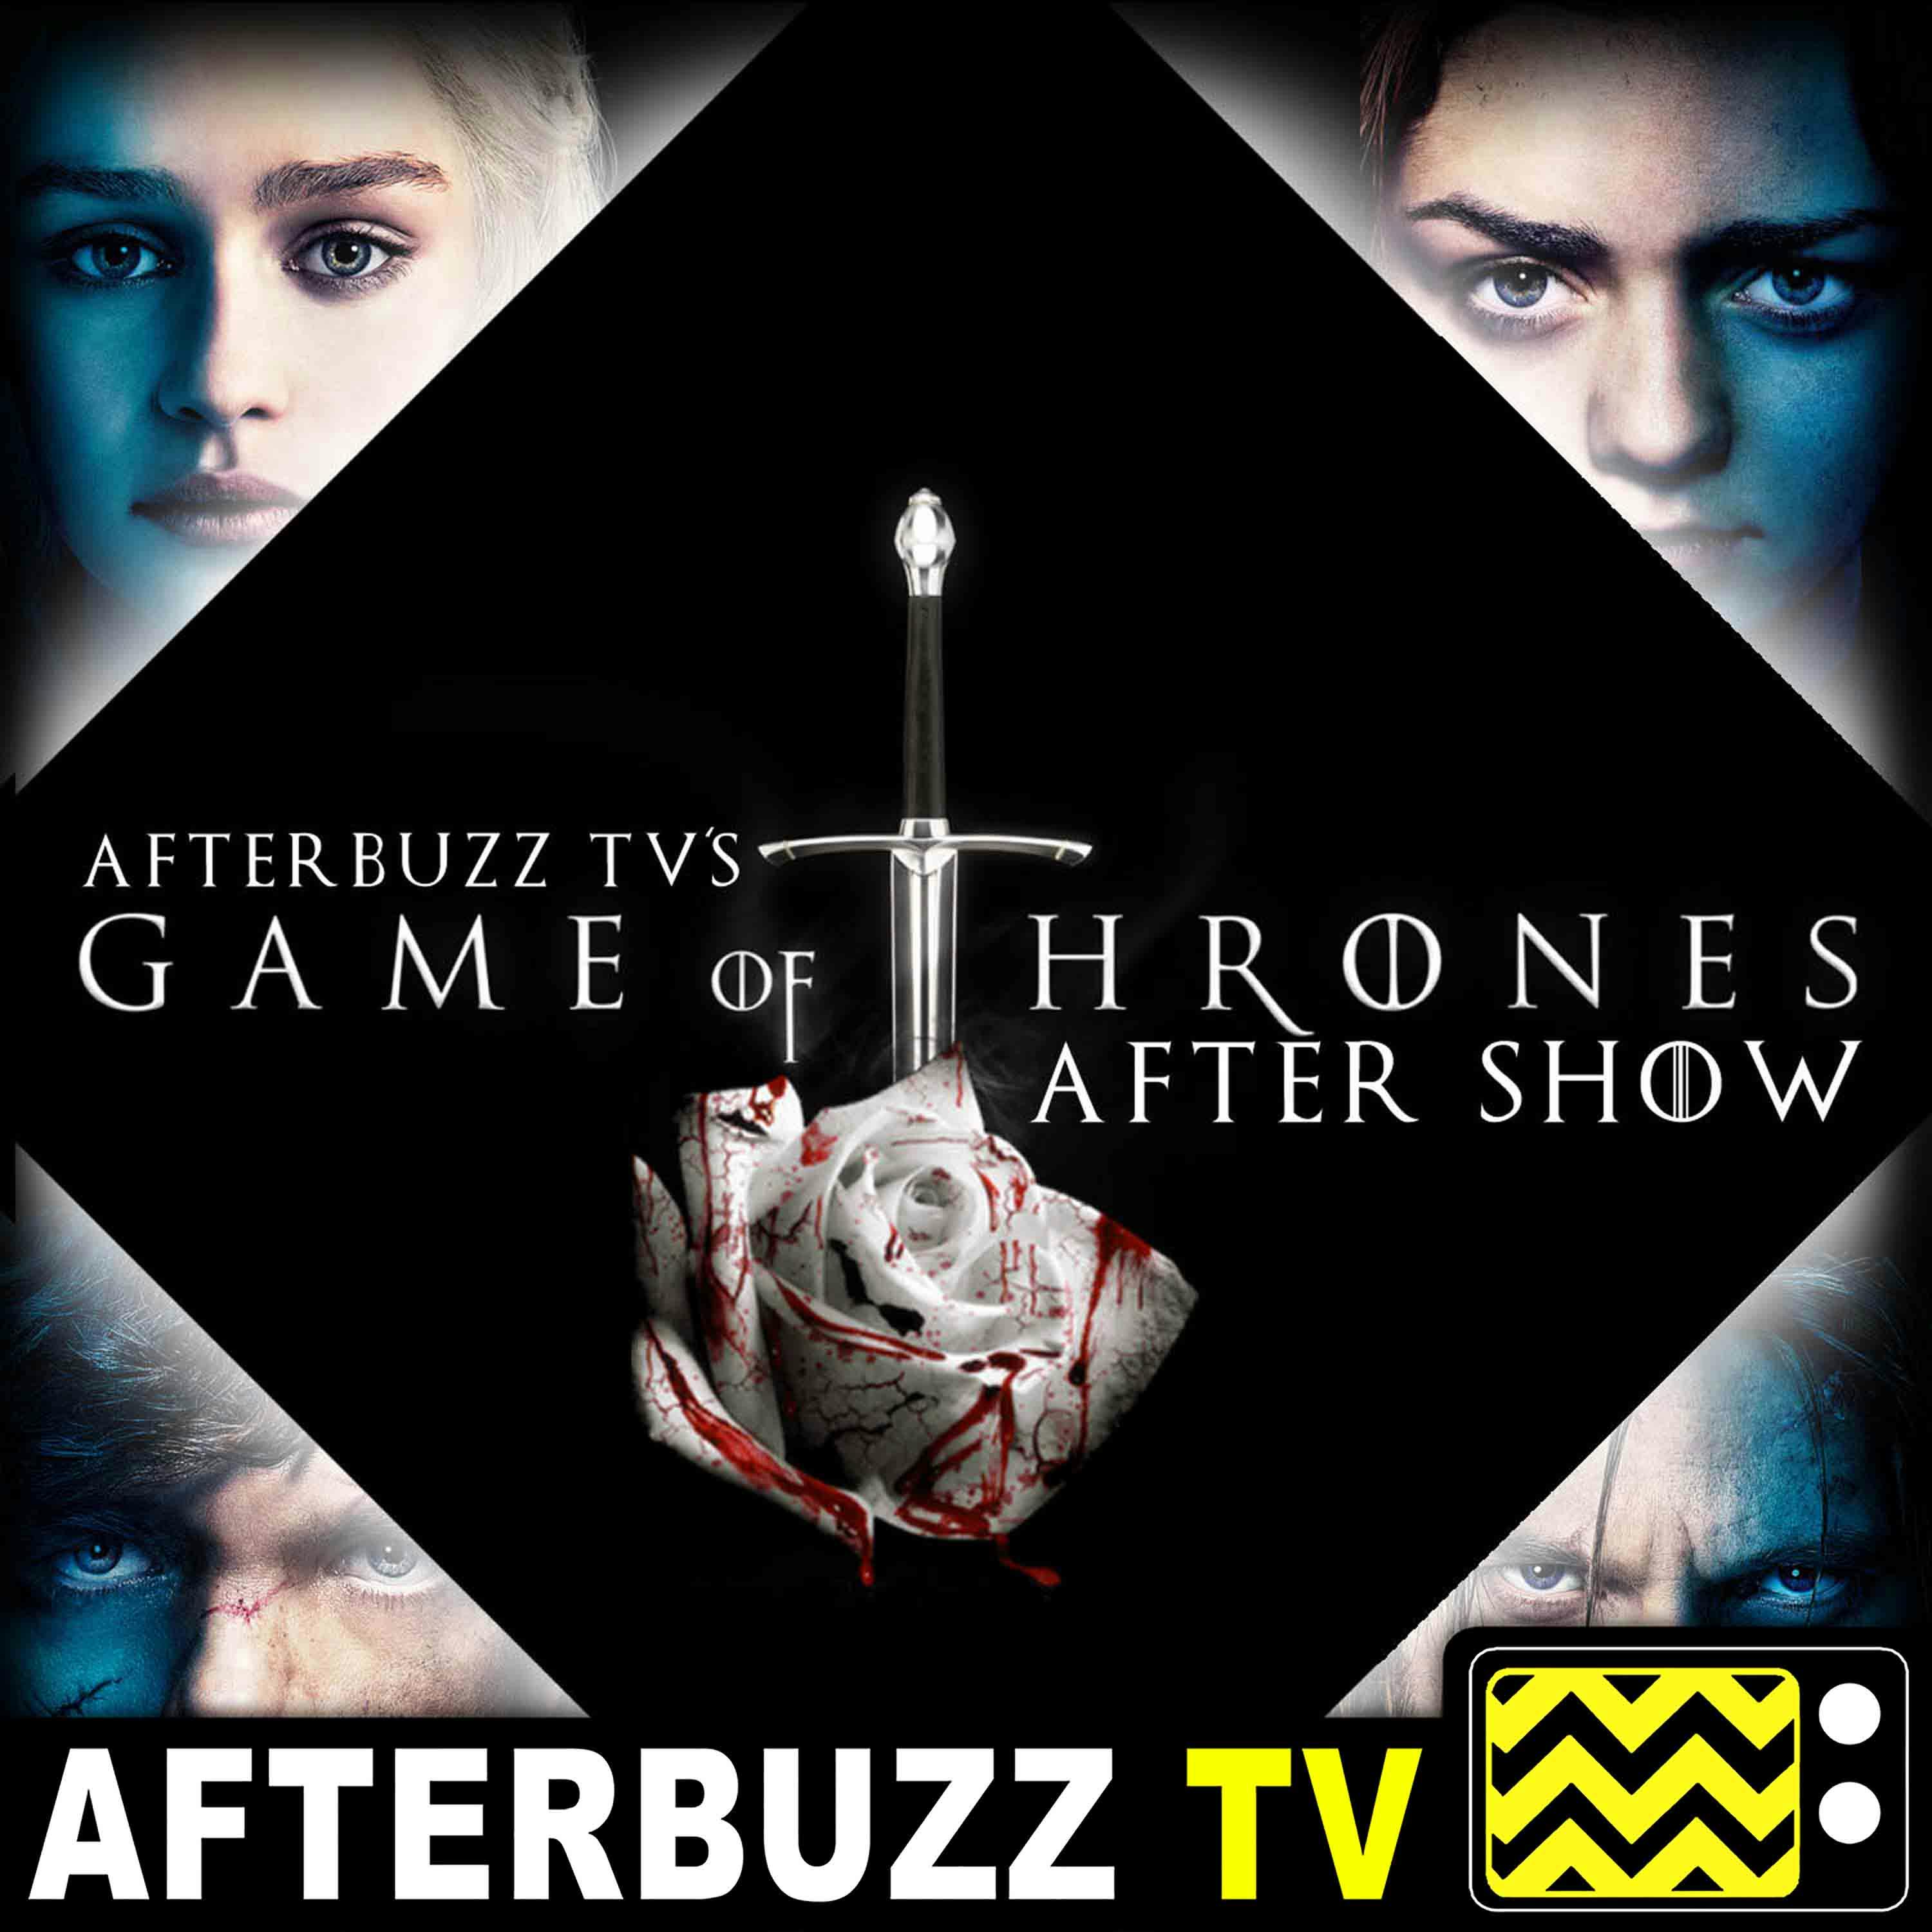 Game of Thrones S:6 | Oathbraker E:3 | AfterBuzz TV AfterShow